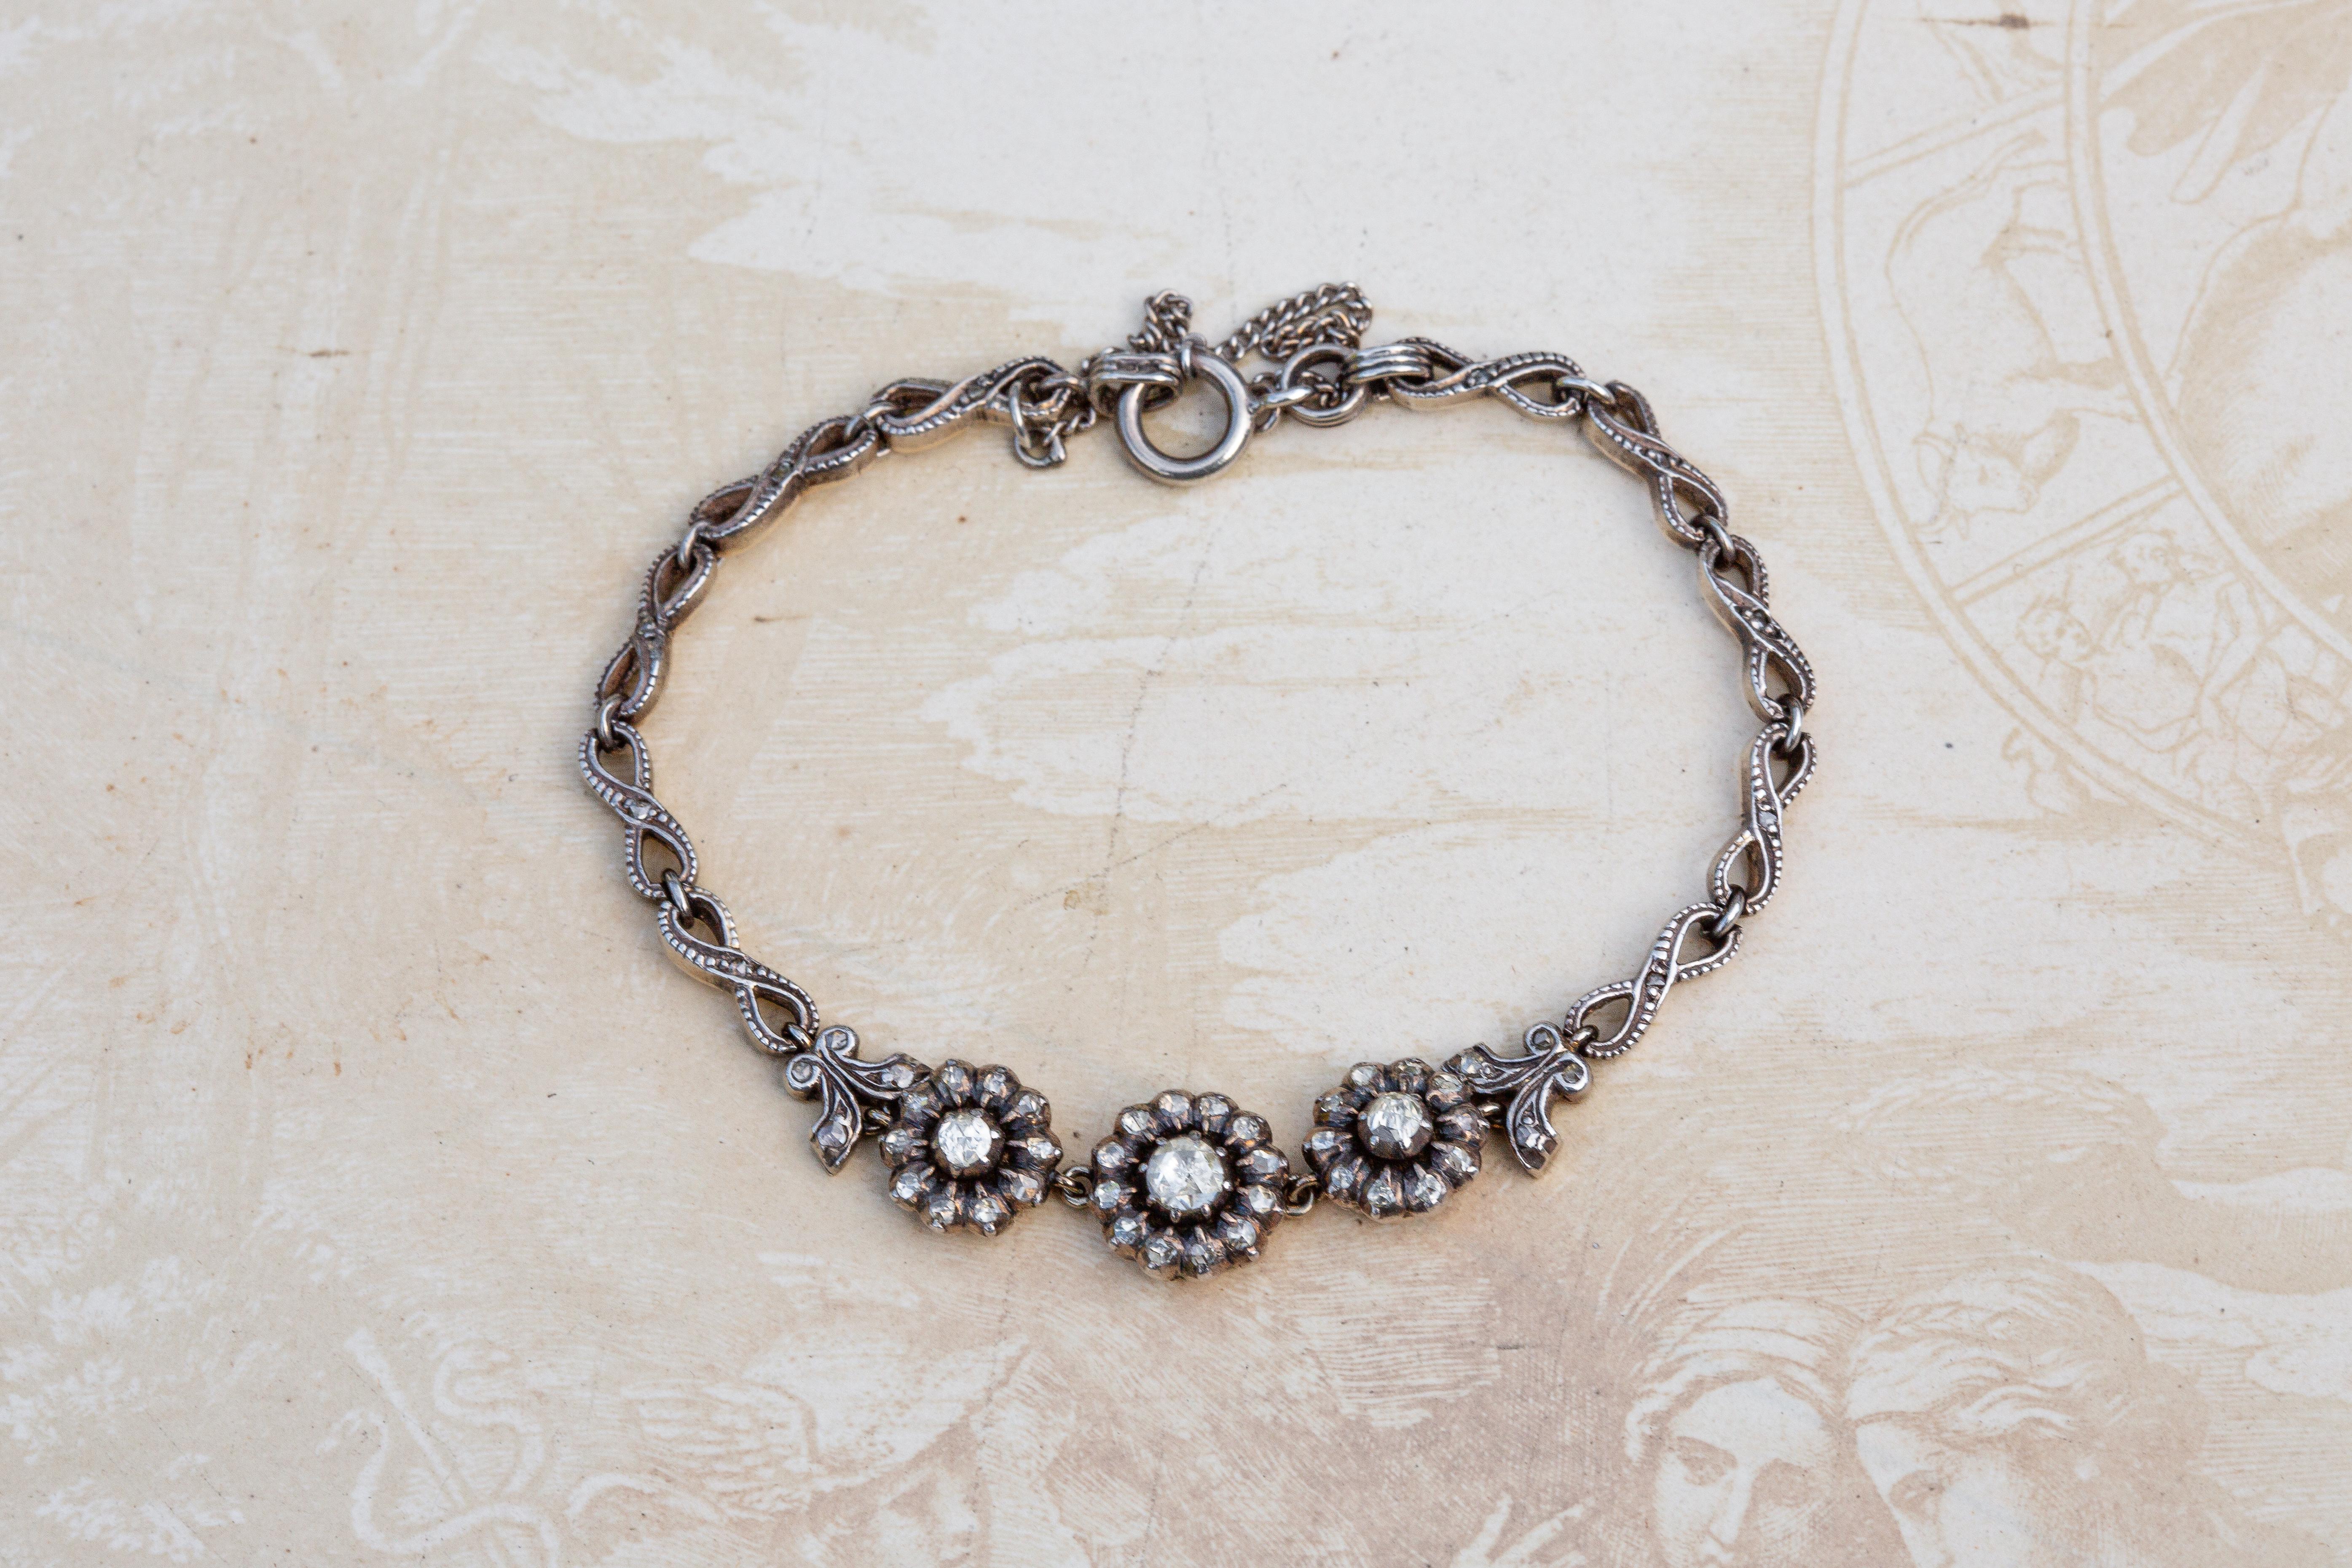 An exquisite Dutch rose cut diamond bracelet dating to the mid-twentieth century. The Netherlands produced expertly crafted Georgian era inspired jewellery right up until the 1950’s - and this bracelet is a fine example of this unique trend. 

The